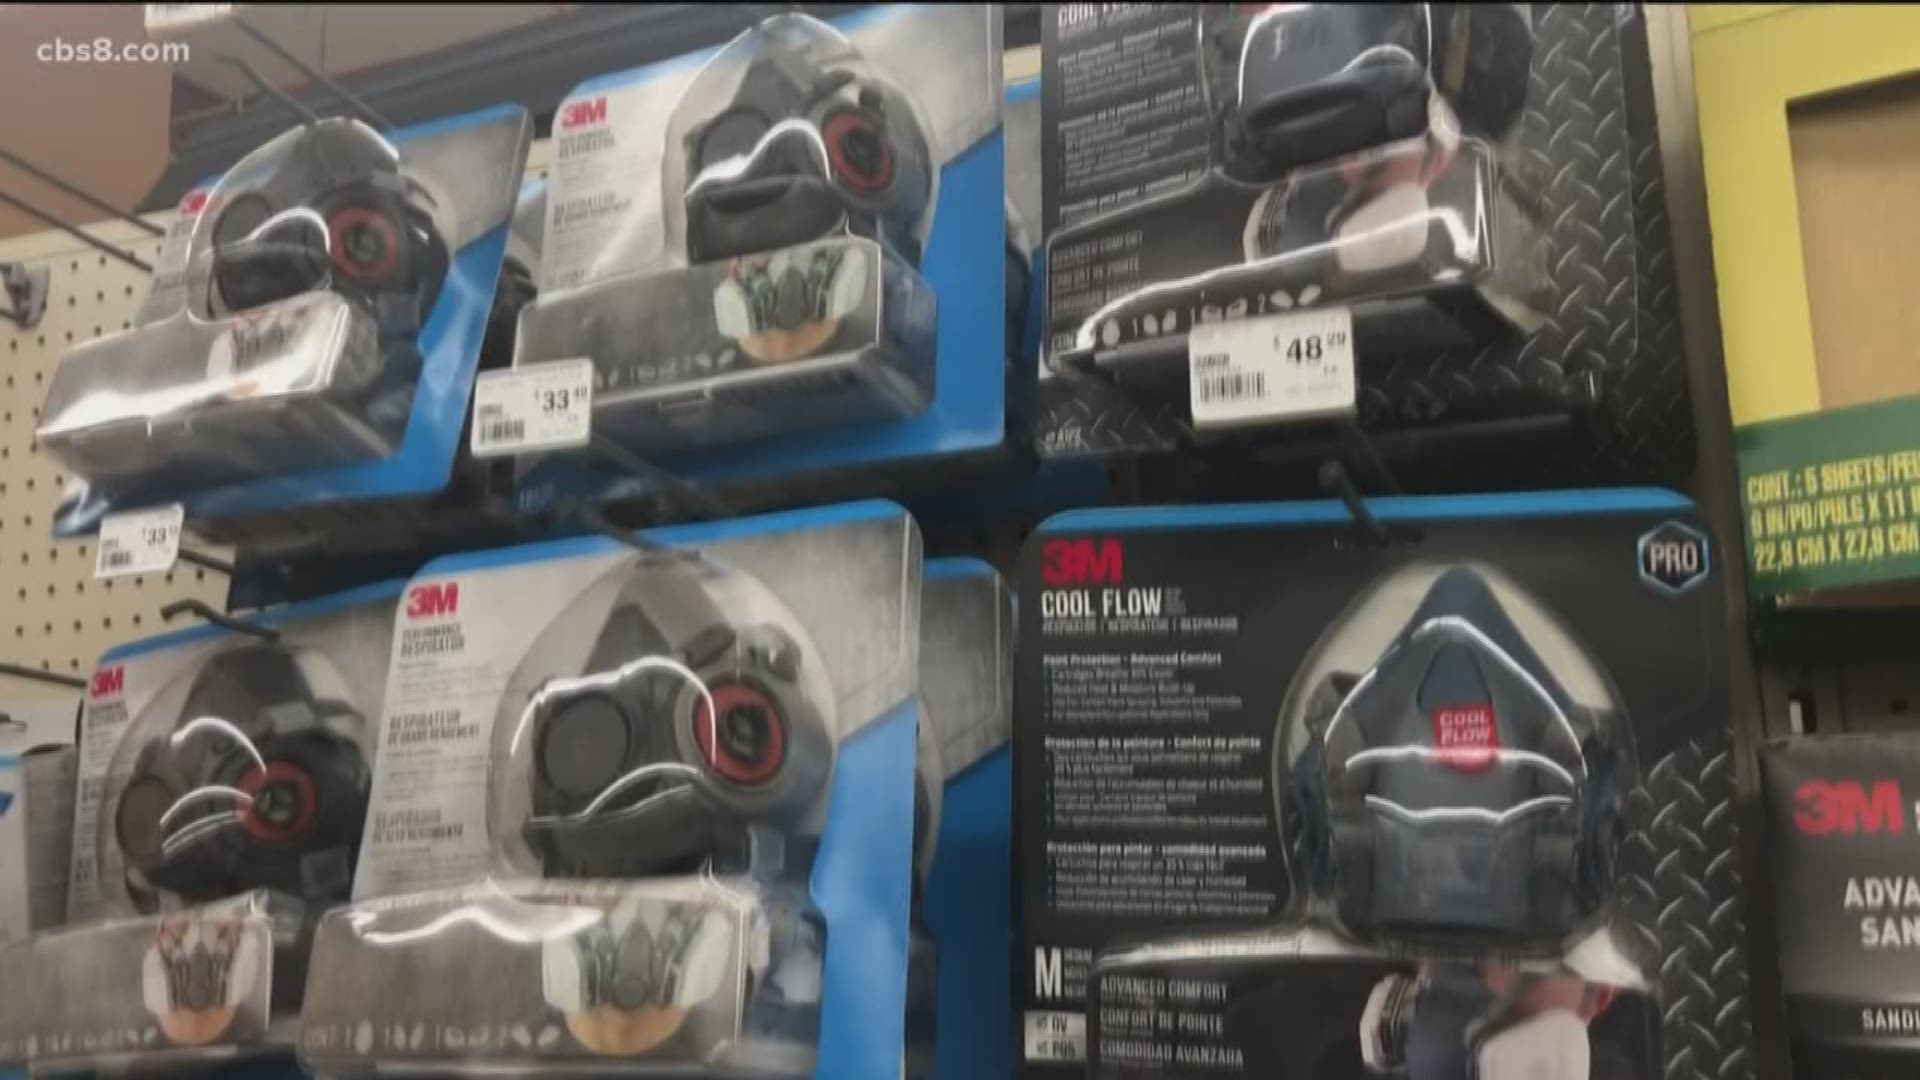 Surgical masks and respirators are flying off the shelves at stores across the country as people prepare for a possible COVID-19 (coronavirus) pandemic.